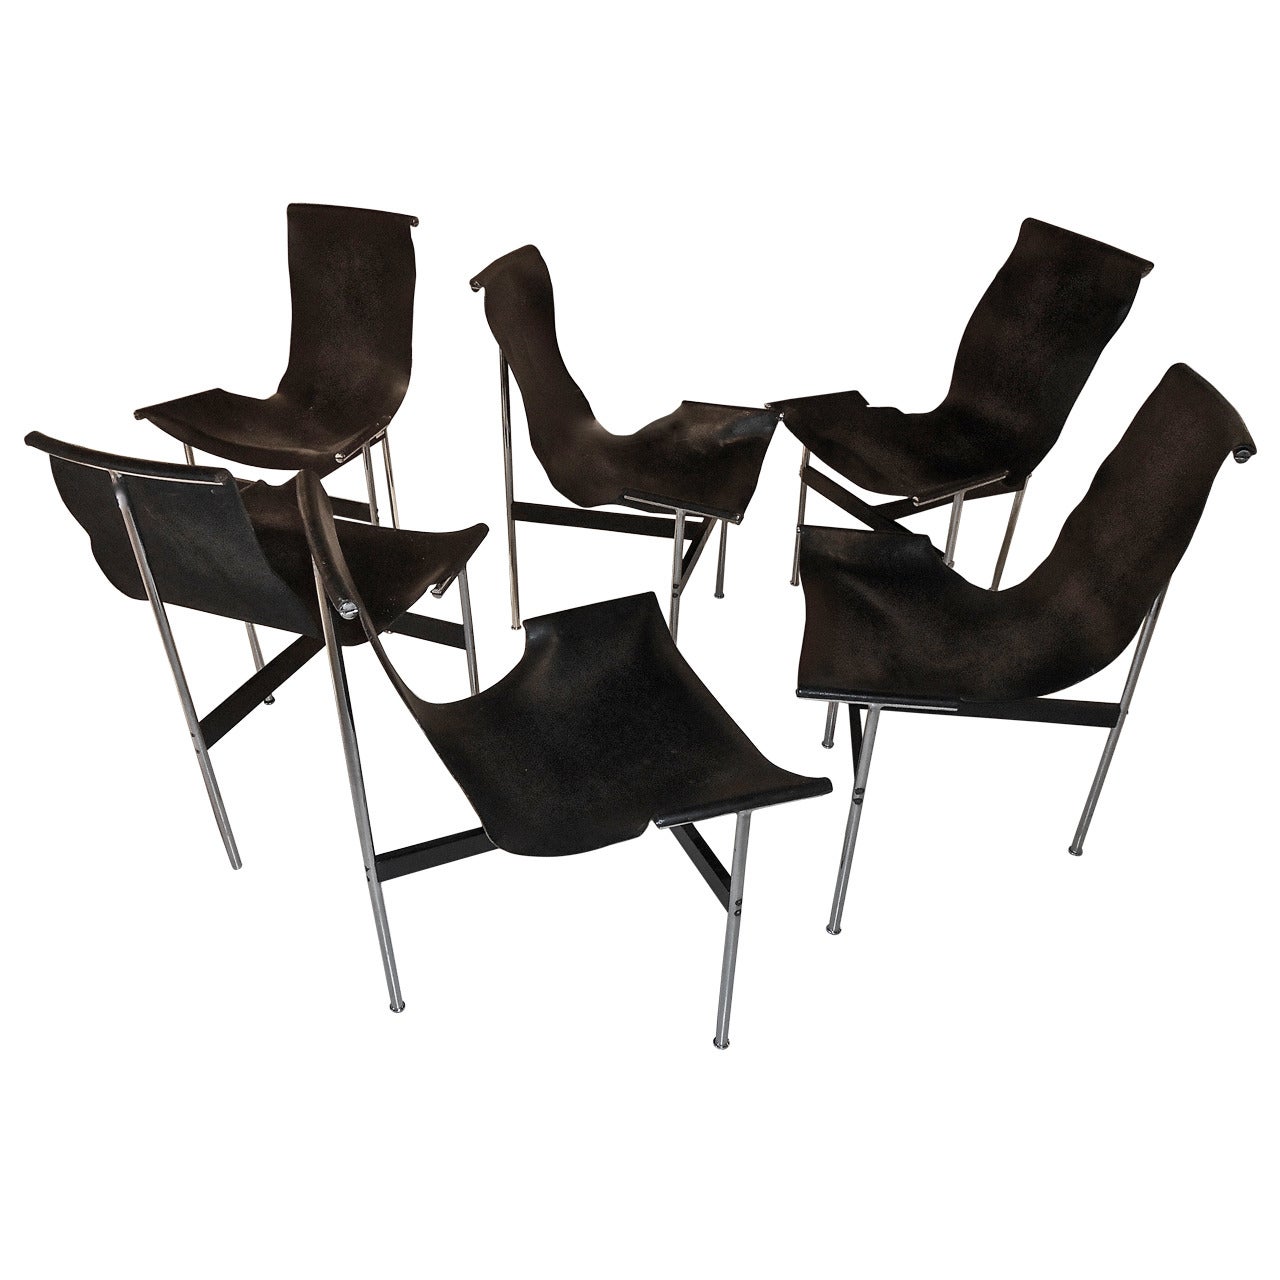 Six "T. Chairs" from Katavolos, Kelly and Littell for Laverne